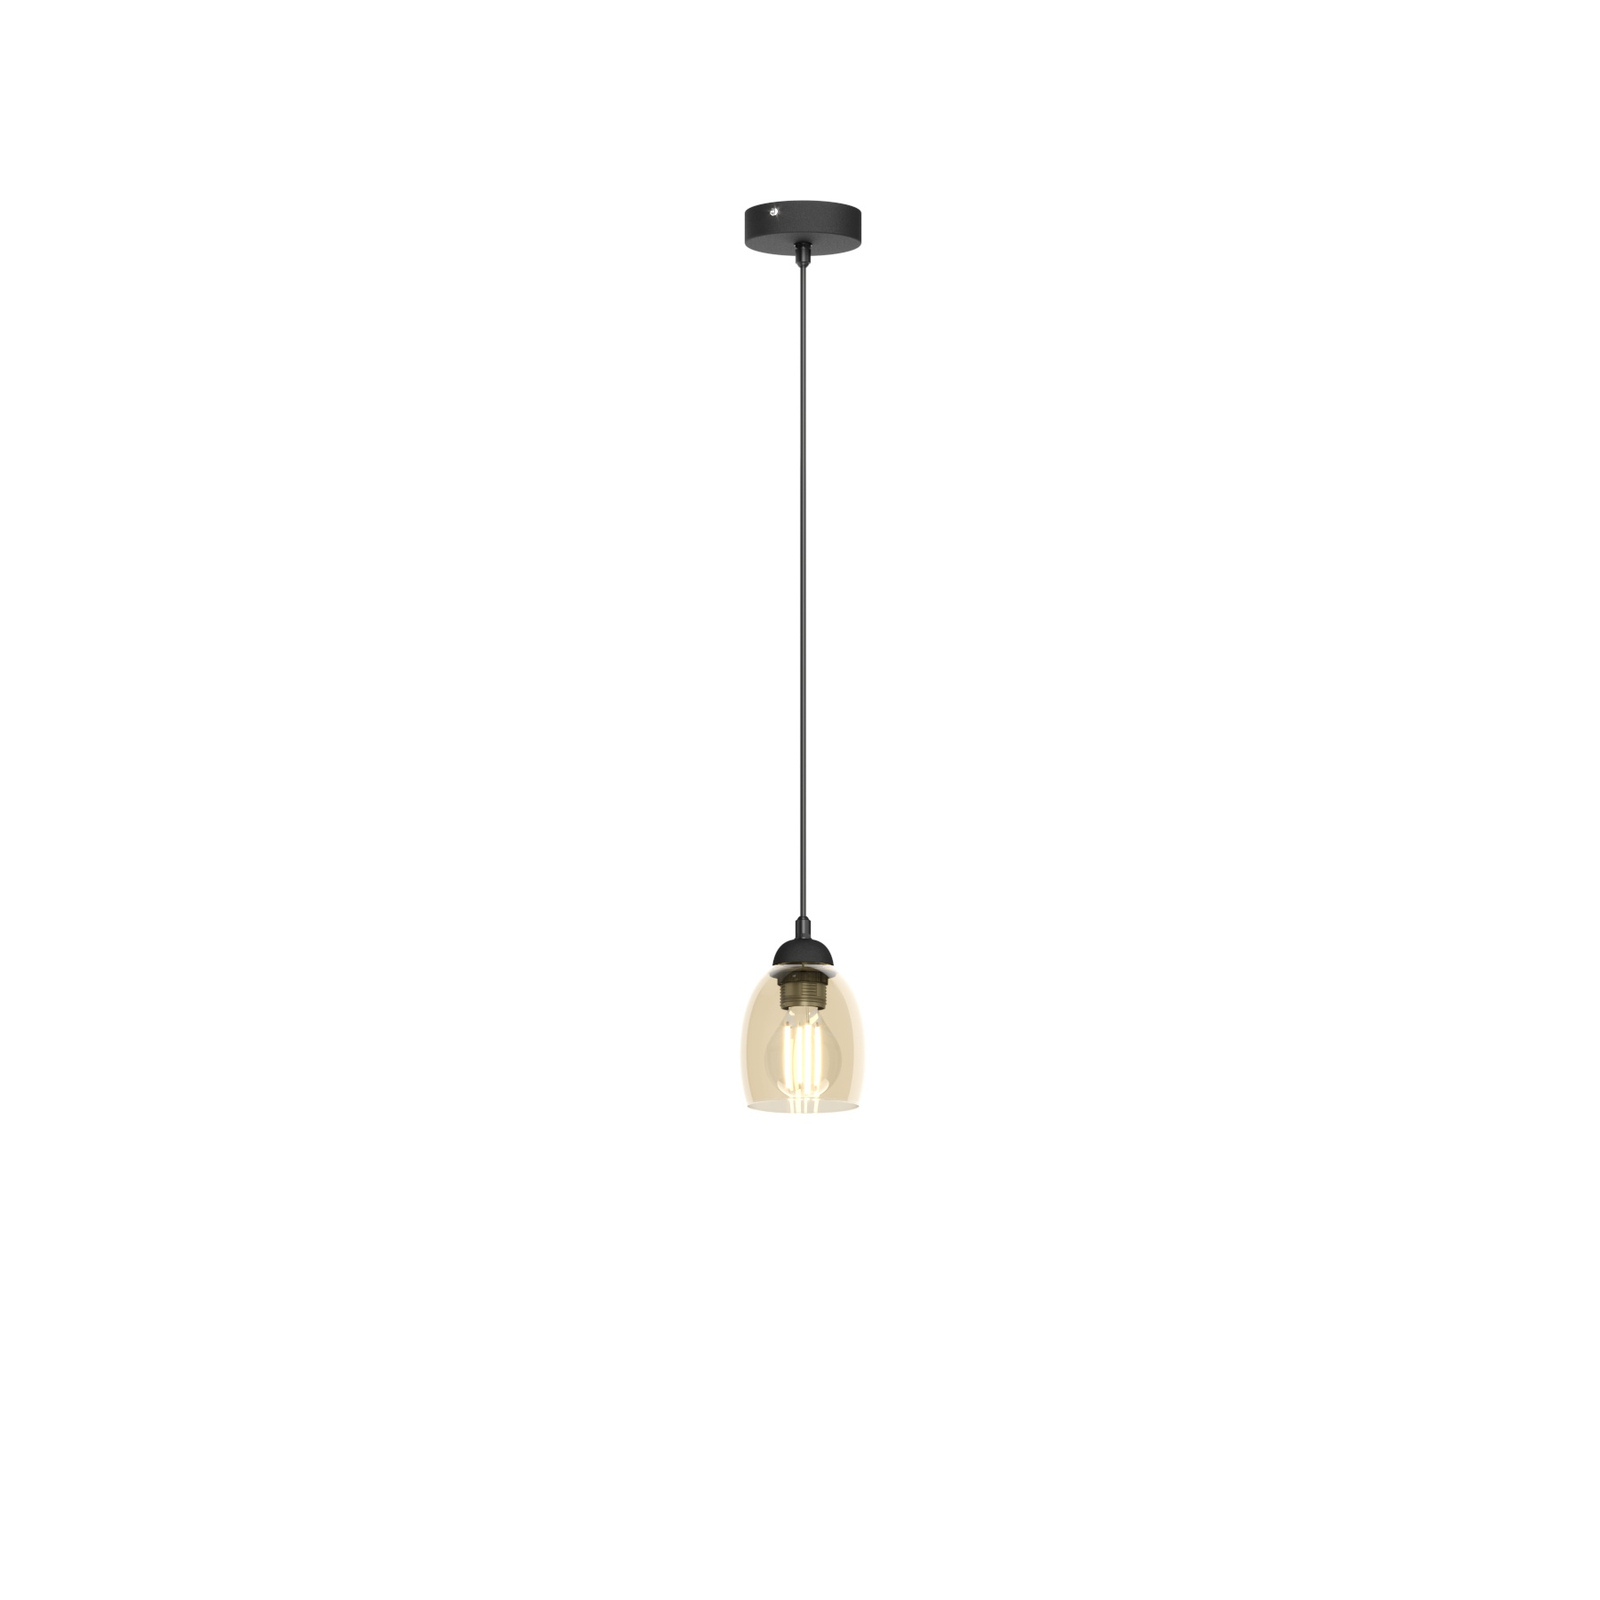 Brilliant hanging light with amber glass lampshade